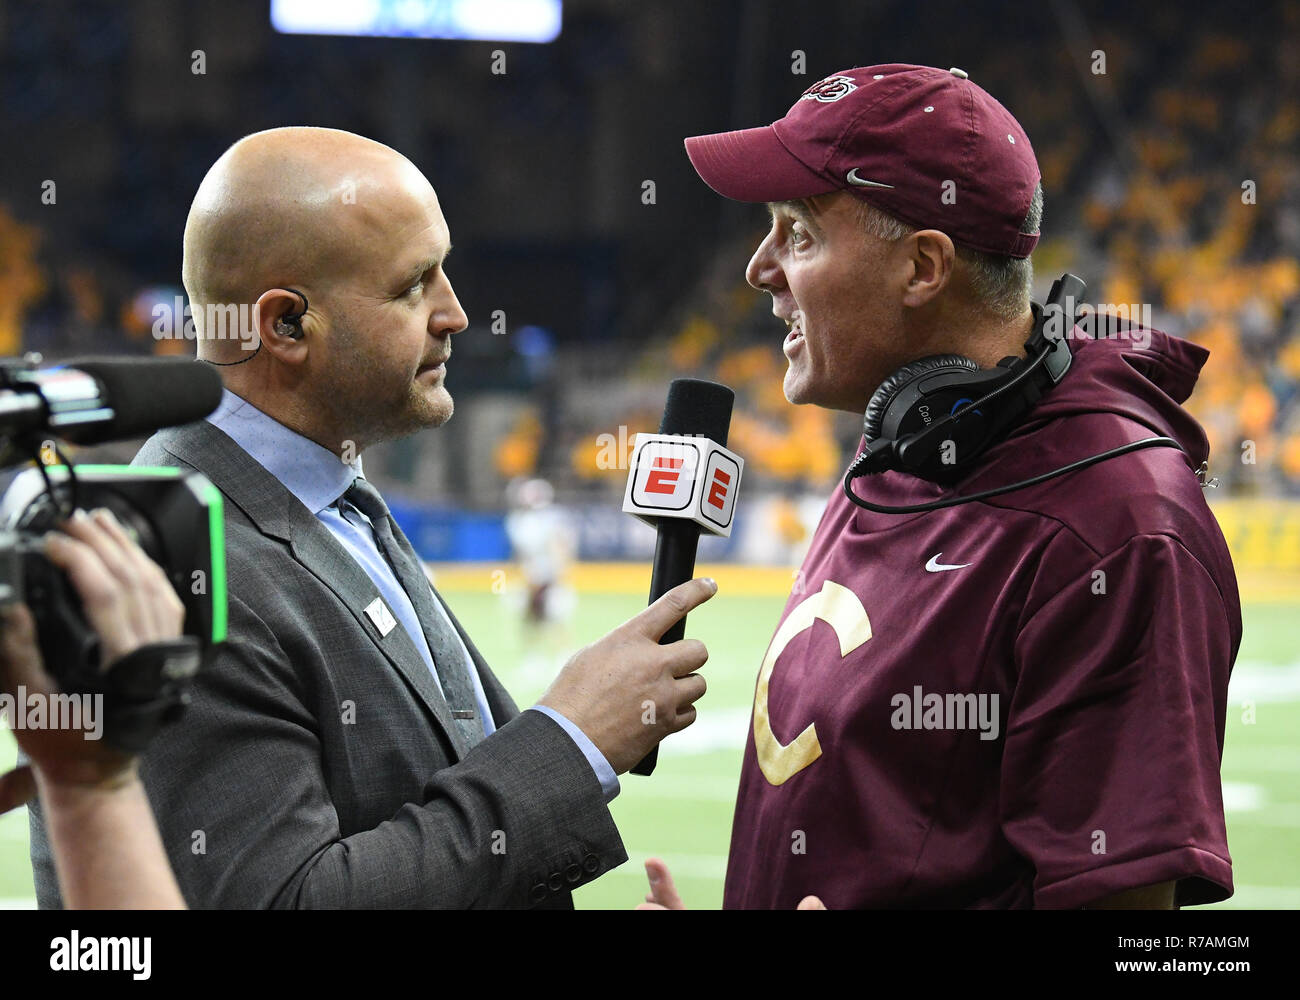 December 8, 2018: Colgate Raiders head coach Dan Hunt in interviewed by an ESPN reporter before a NCAA FCS playoff quarter final football game between the Colgate University Raiders and the North Dakota State Bison at the Fargo Dome, Fargo, North Dakota. North Dakota State defeated Colgate 35-0. Photo by Russell Hons Stock Photo